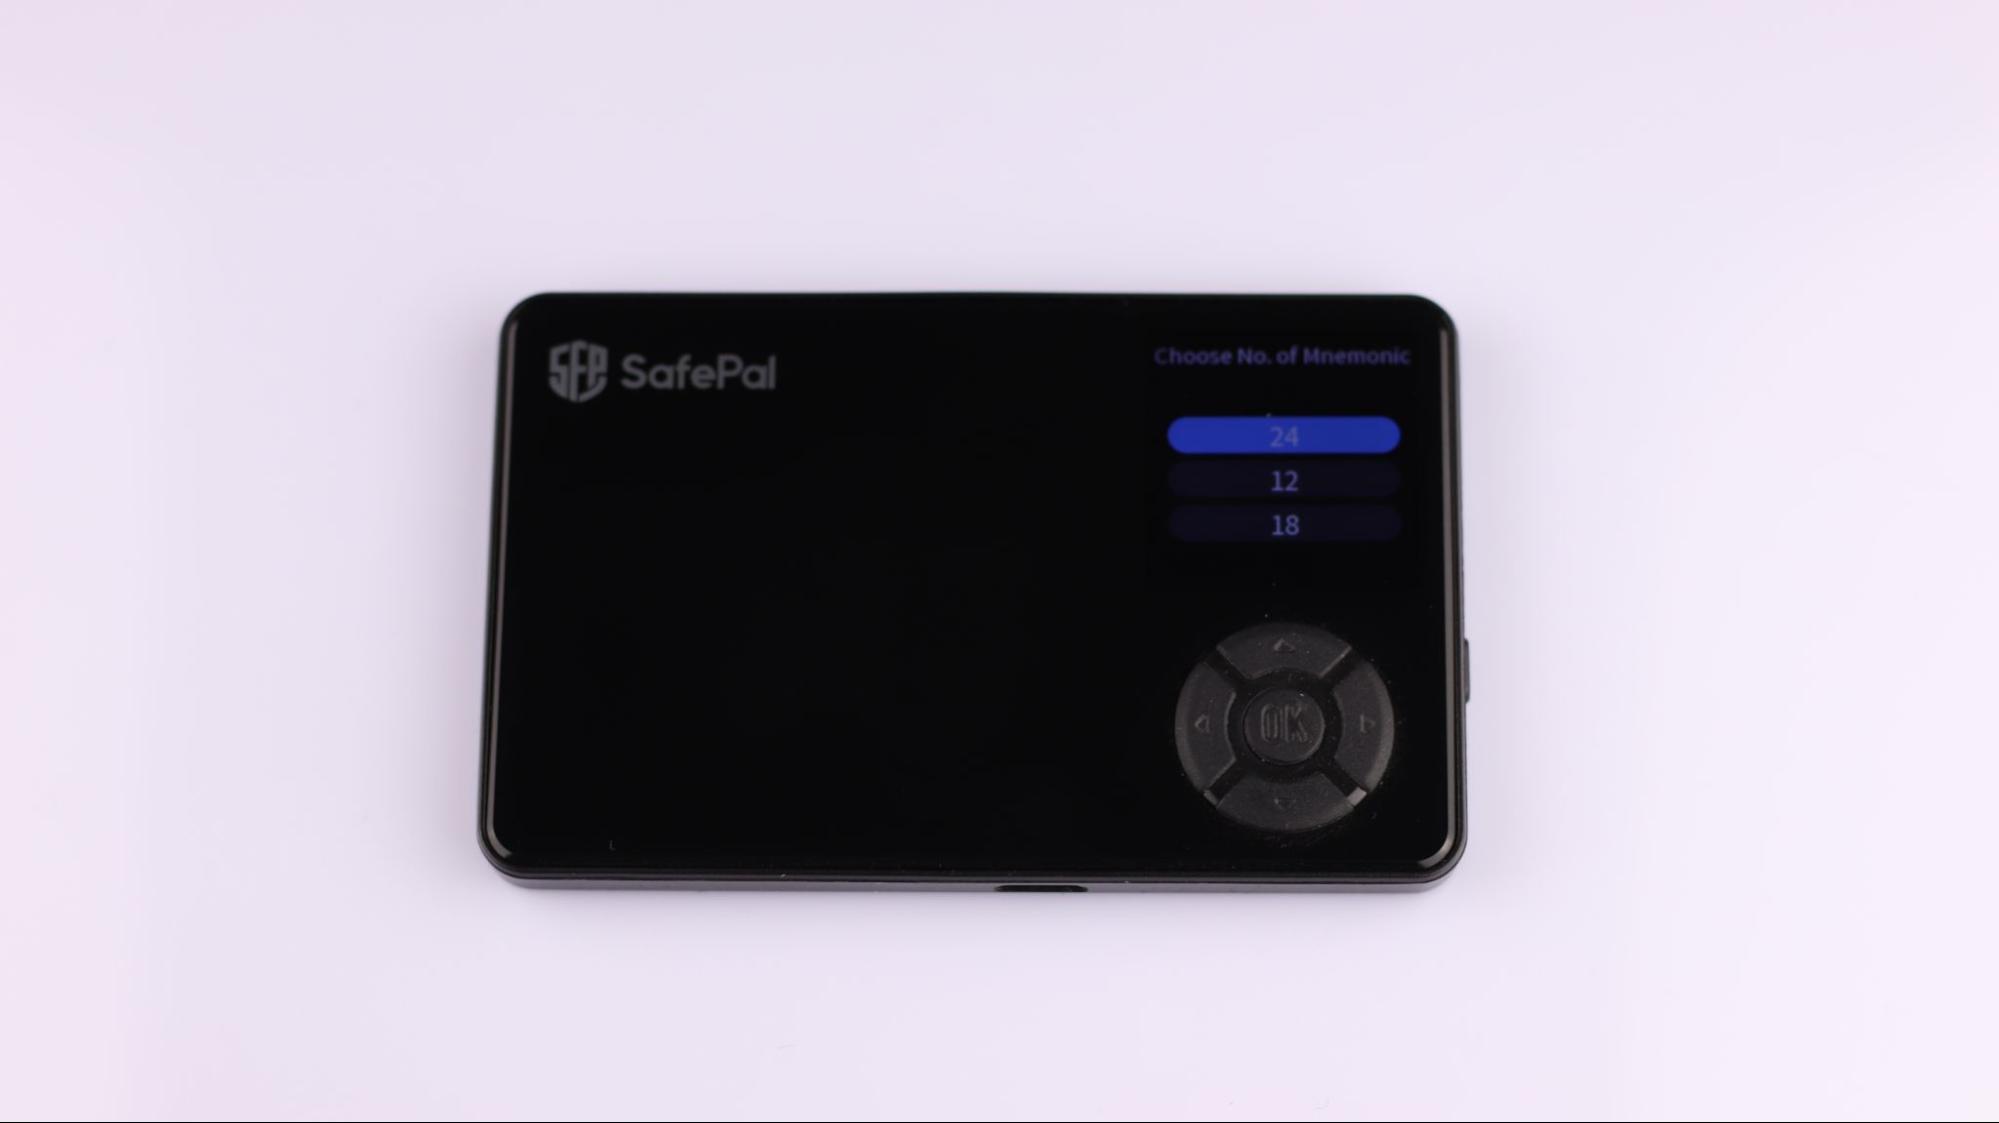 safepal-s1-review-15